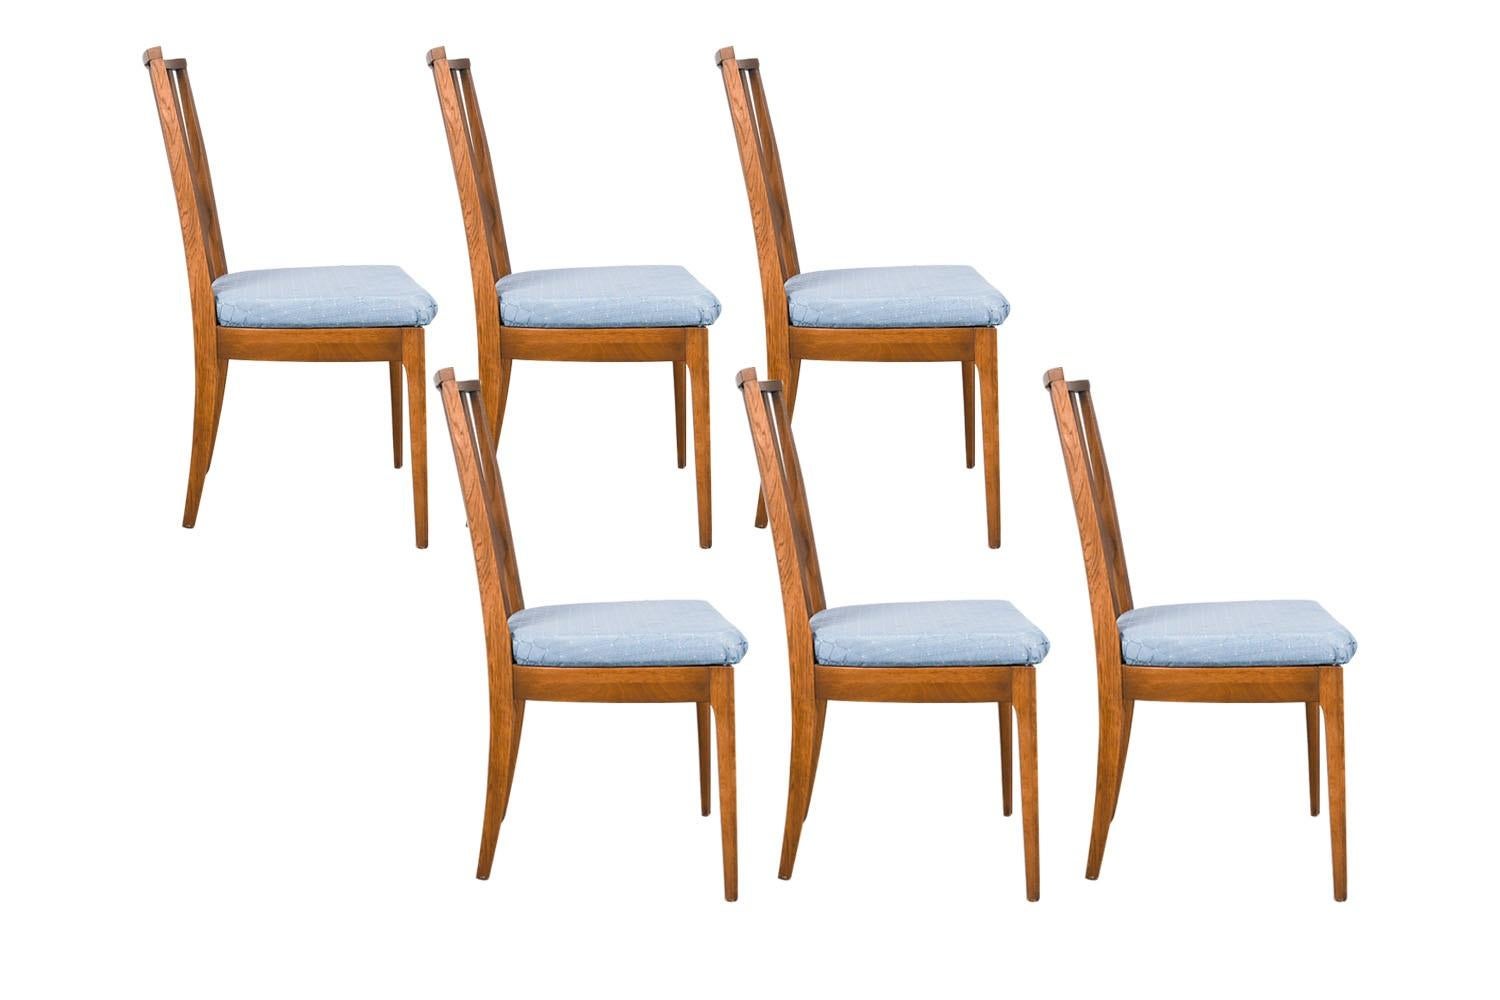 Set of six stunning Mid-Century Modern walnut Broyhill brasilia dining chairs designed by the legendary Oscar Niemeyer, and manufactured by Broyhill for the Brasilia collection, circa early 1960s. The Brasilia line is a collection that was first